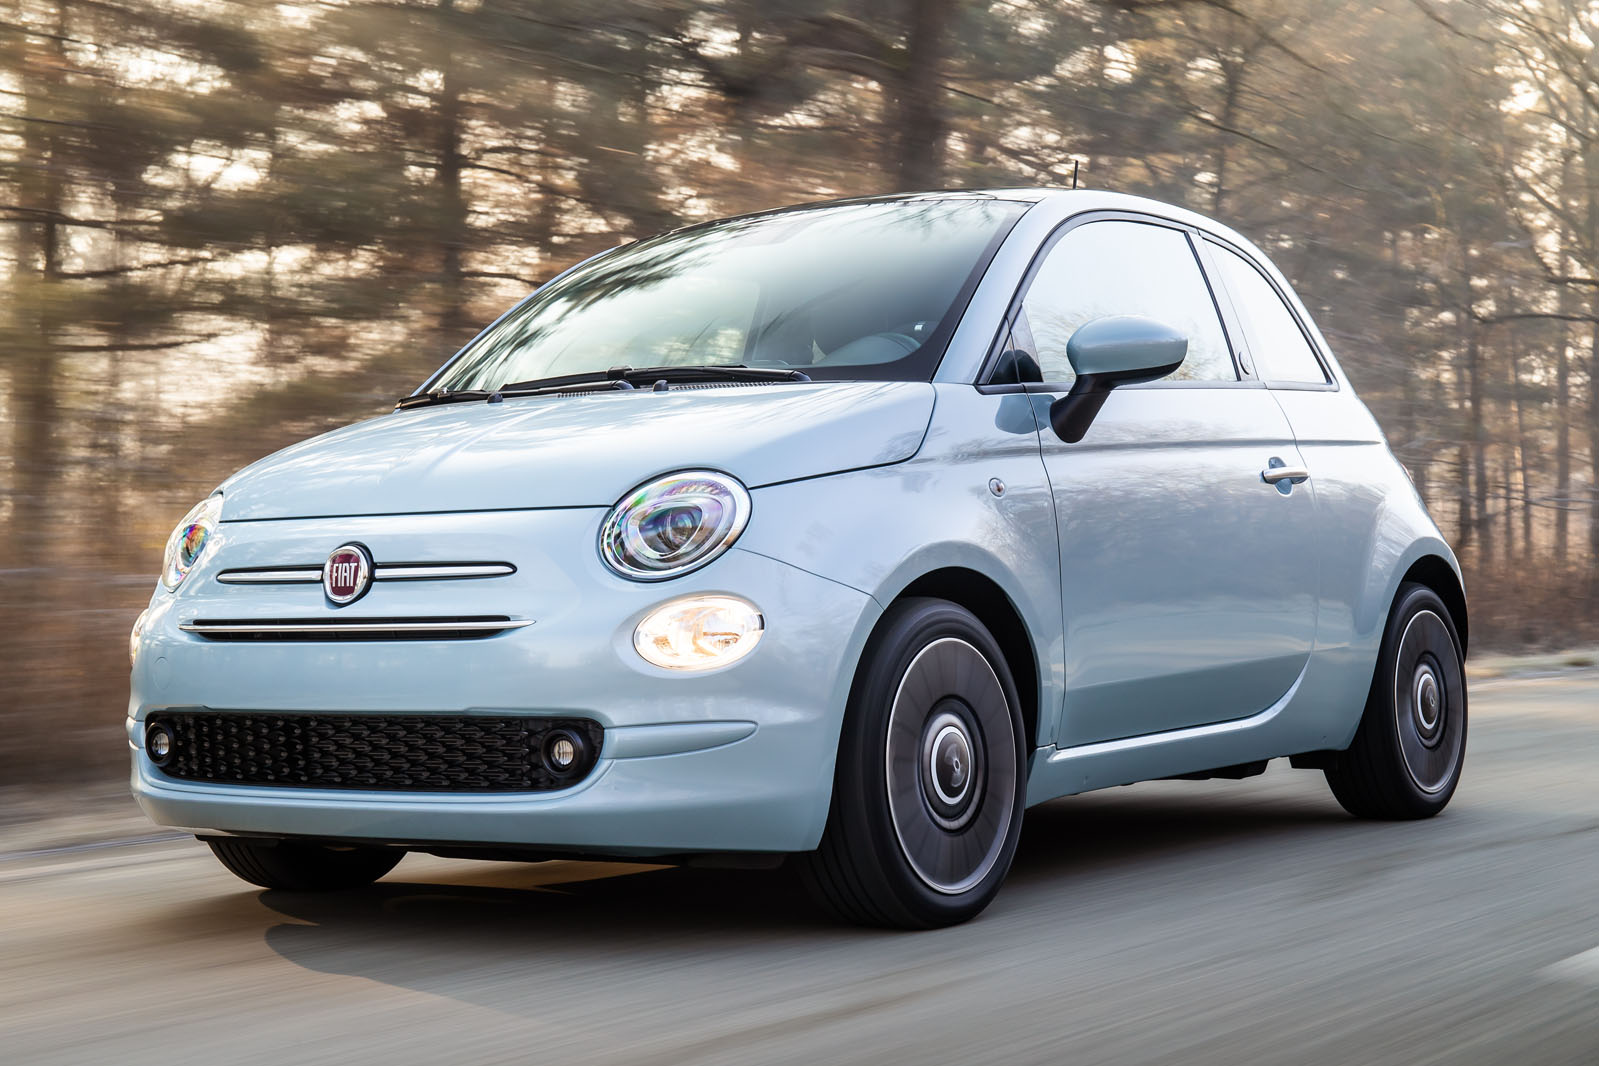 https://www.autocar.co.uk/sites/autocar.co.uk/files/images/car-reviews/first-drives/legacy/1-fiat-500-hybrid-2020-fd-hero-front.jpg